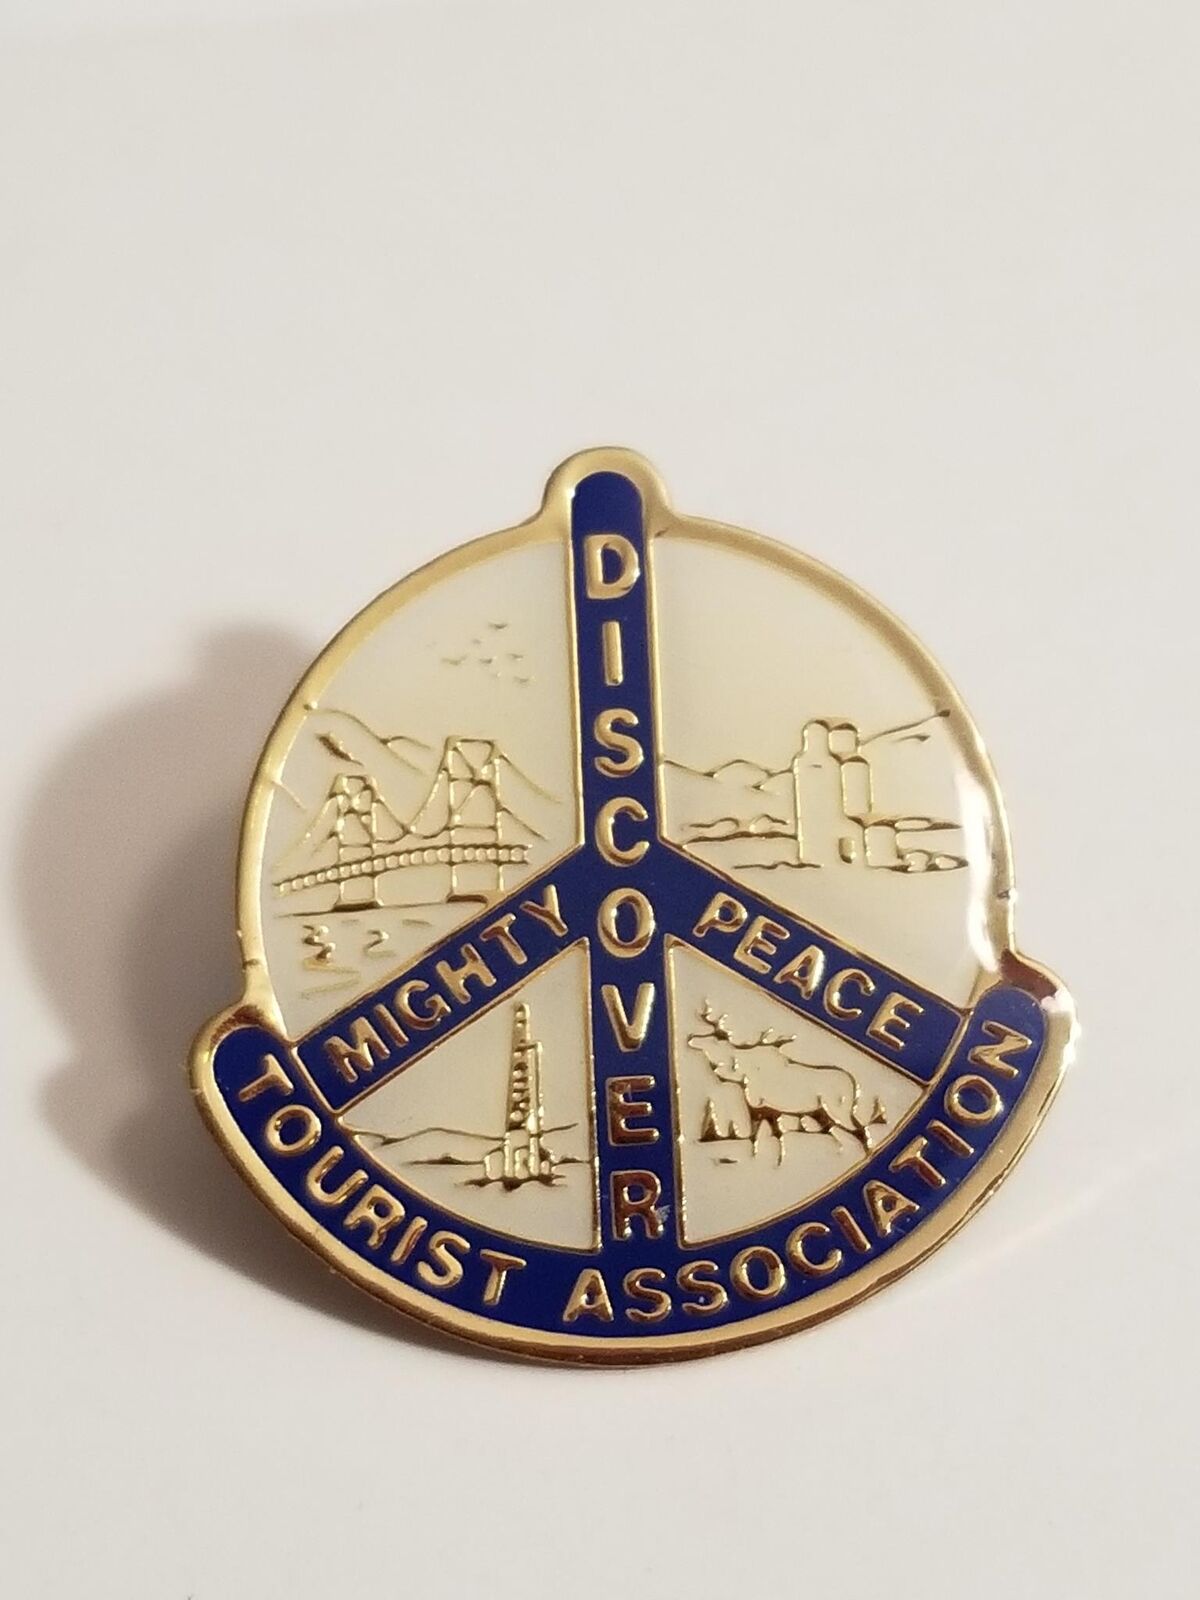 Discover Mighty Peace Tourist Association Lapel Pin 4301